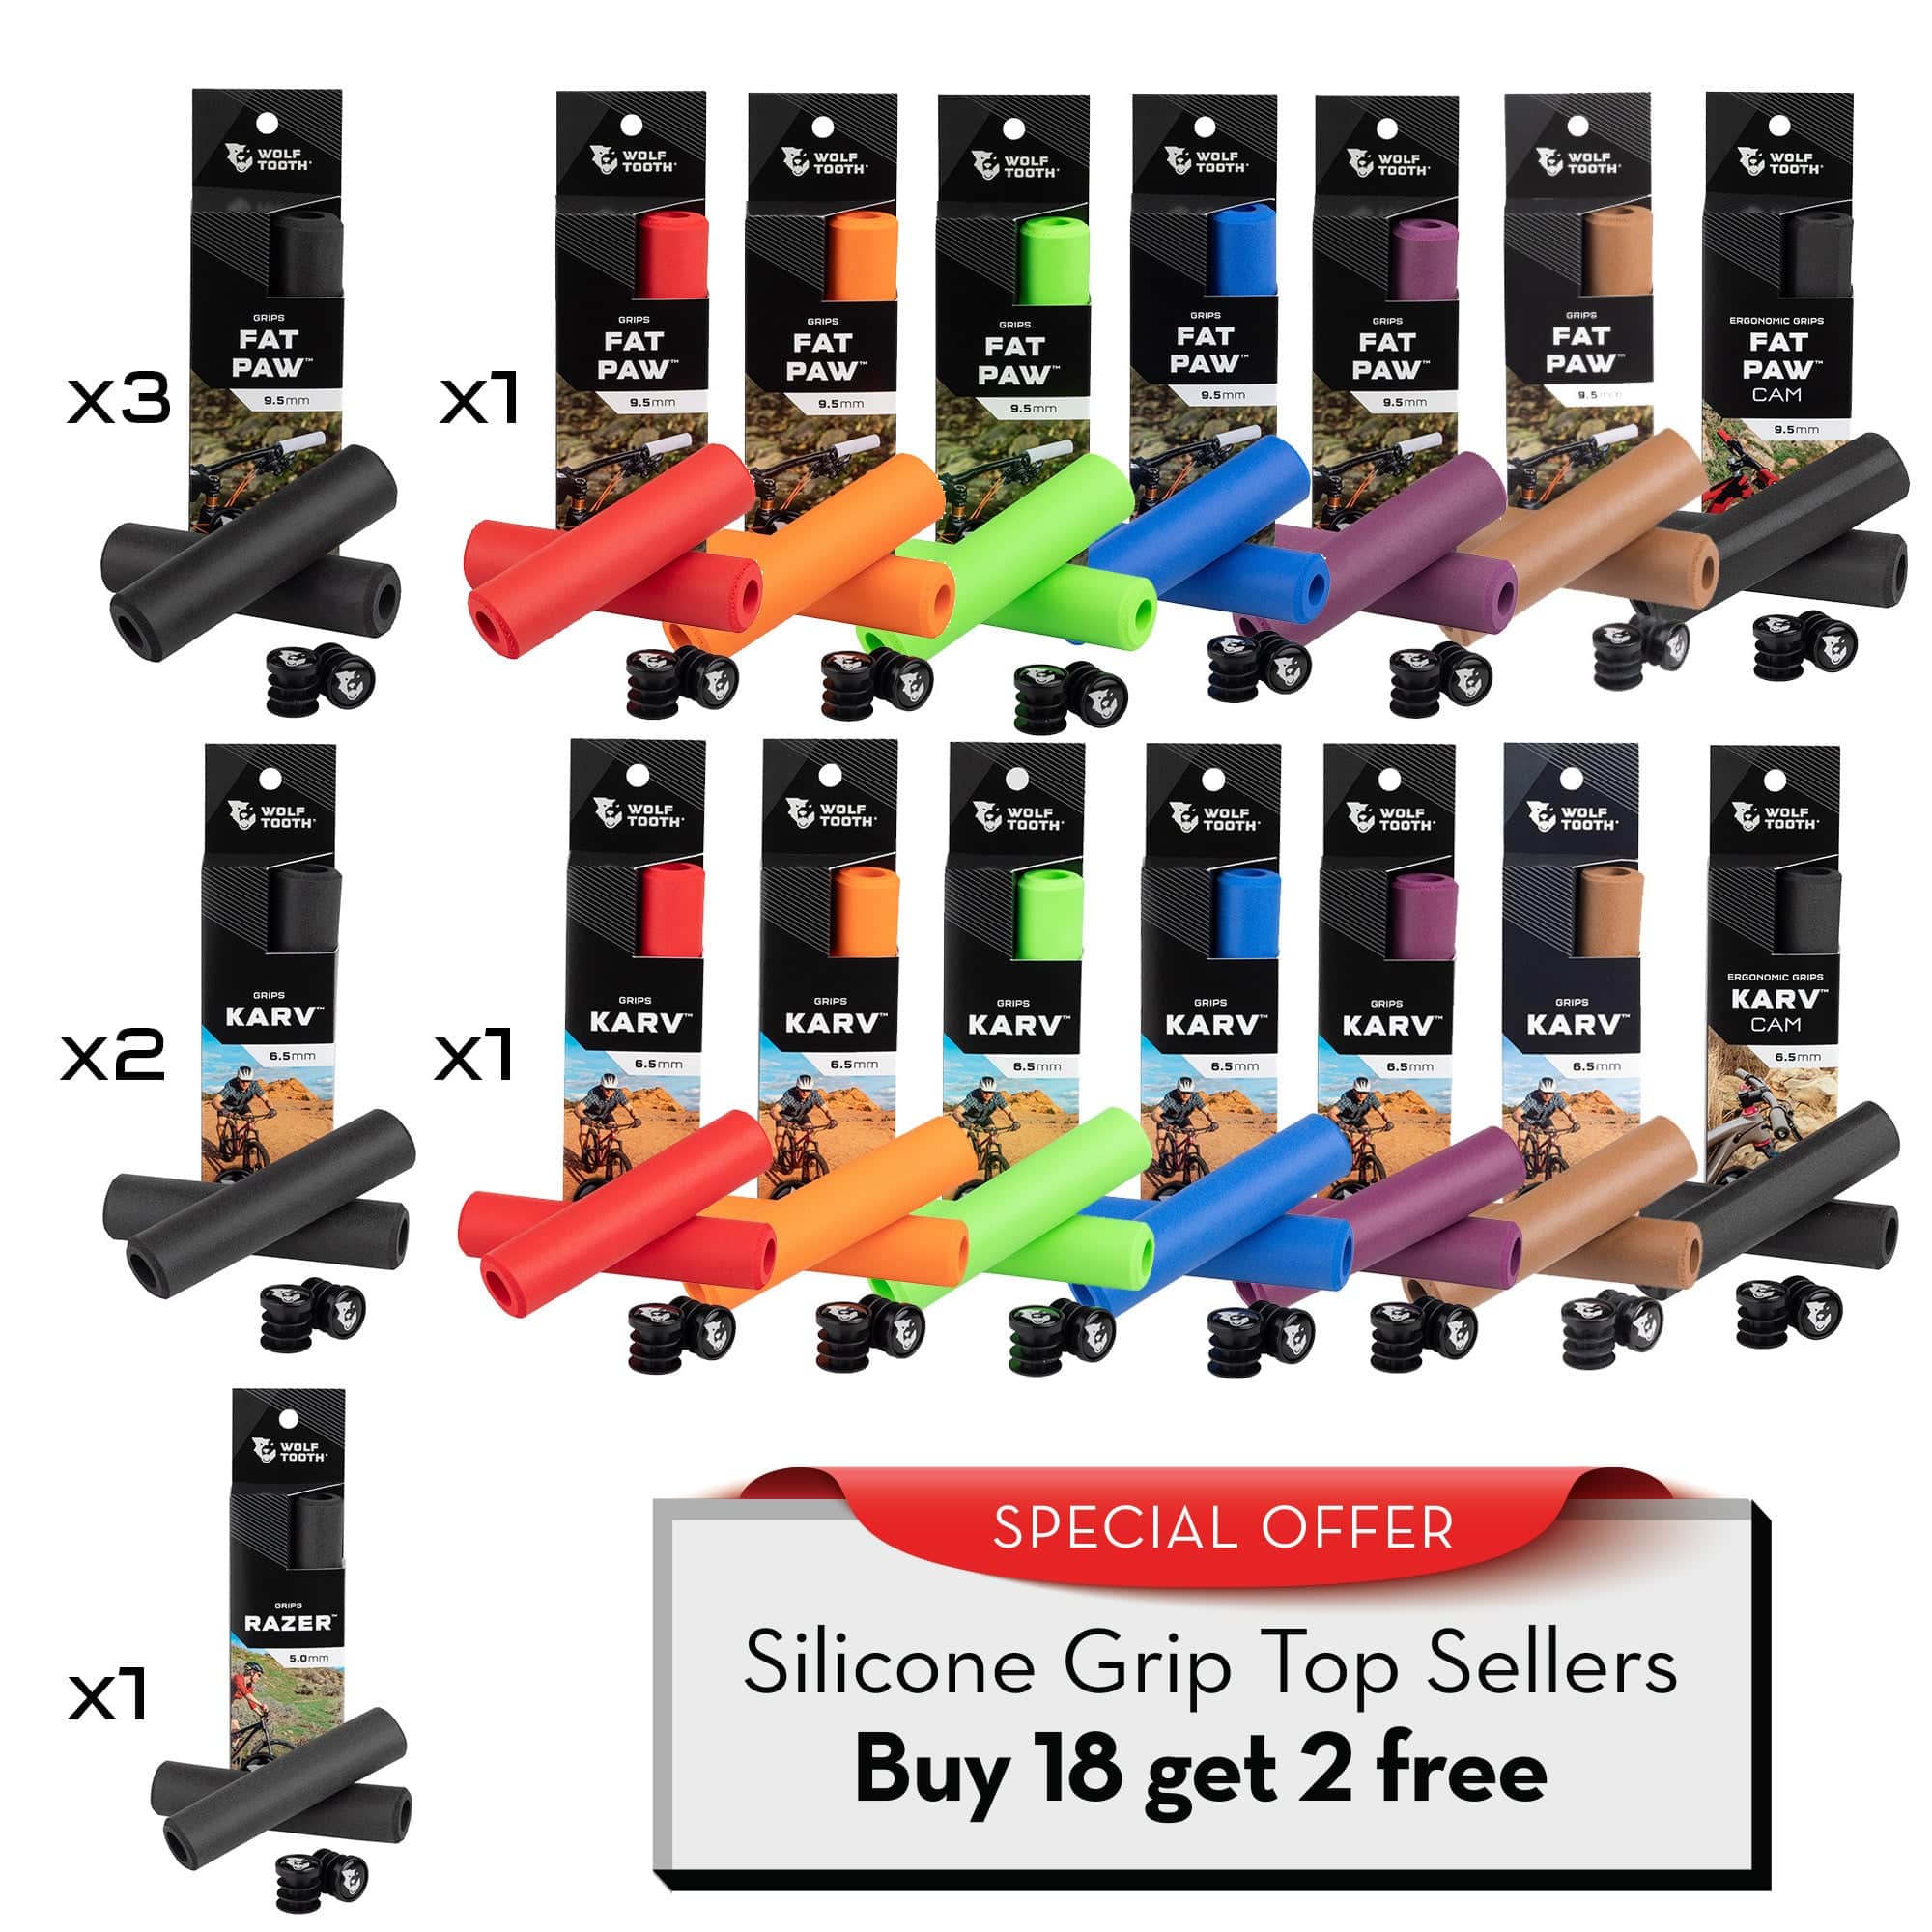 Silicone Grip Top Seller Bundle - Buy 18 sets and get 2 set for Free